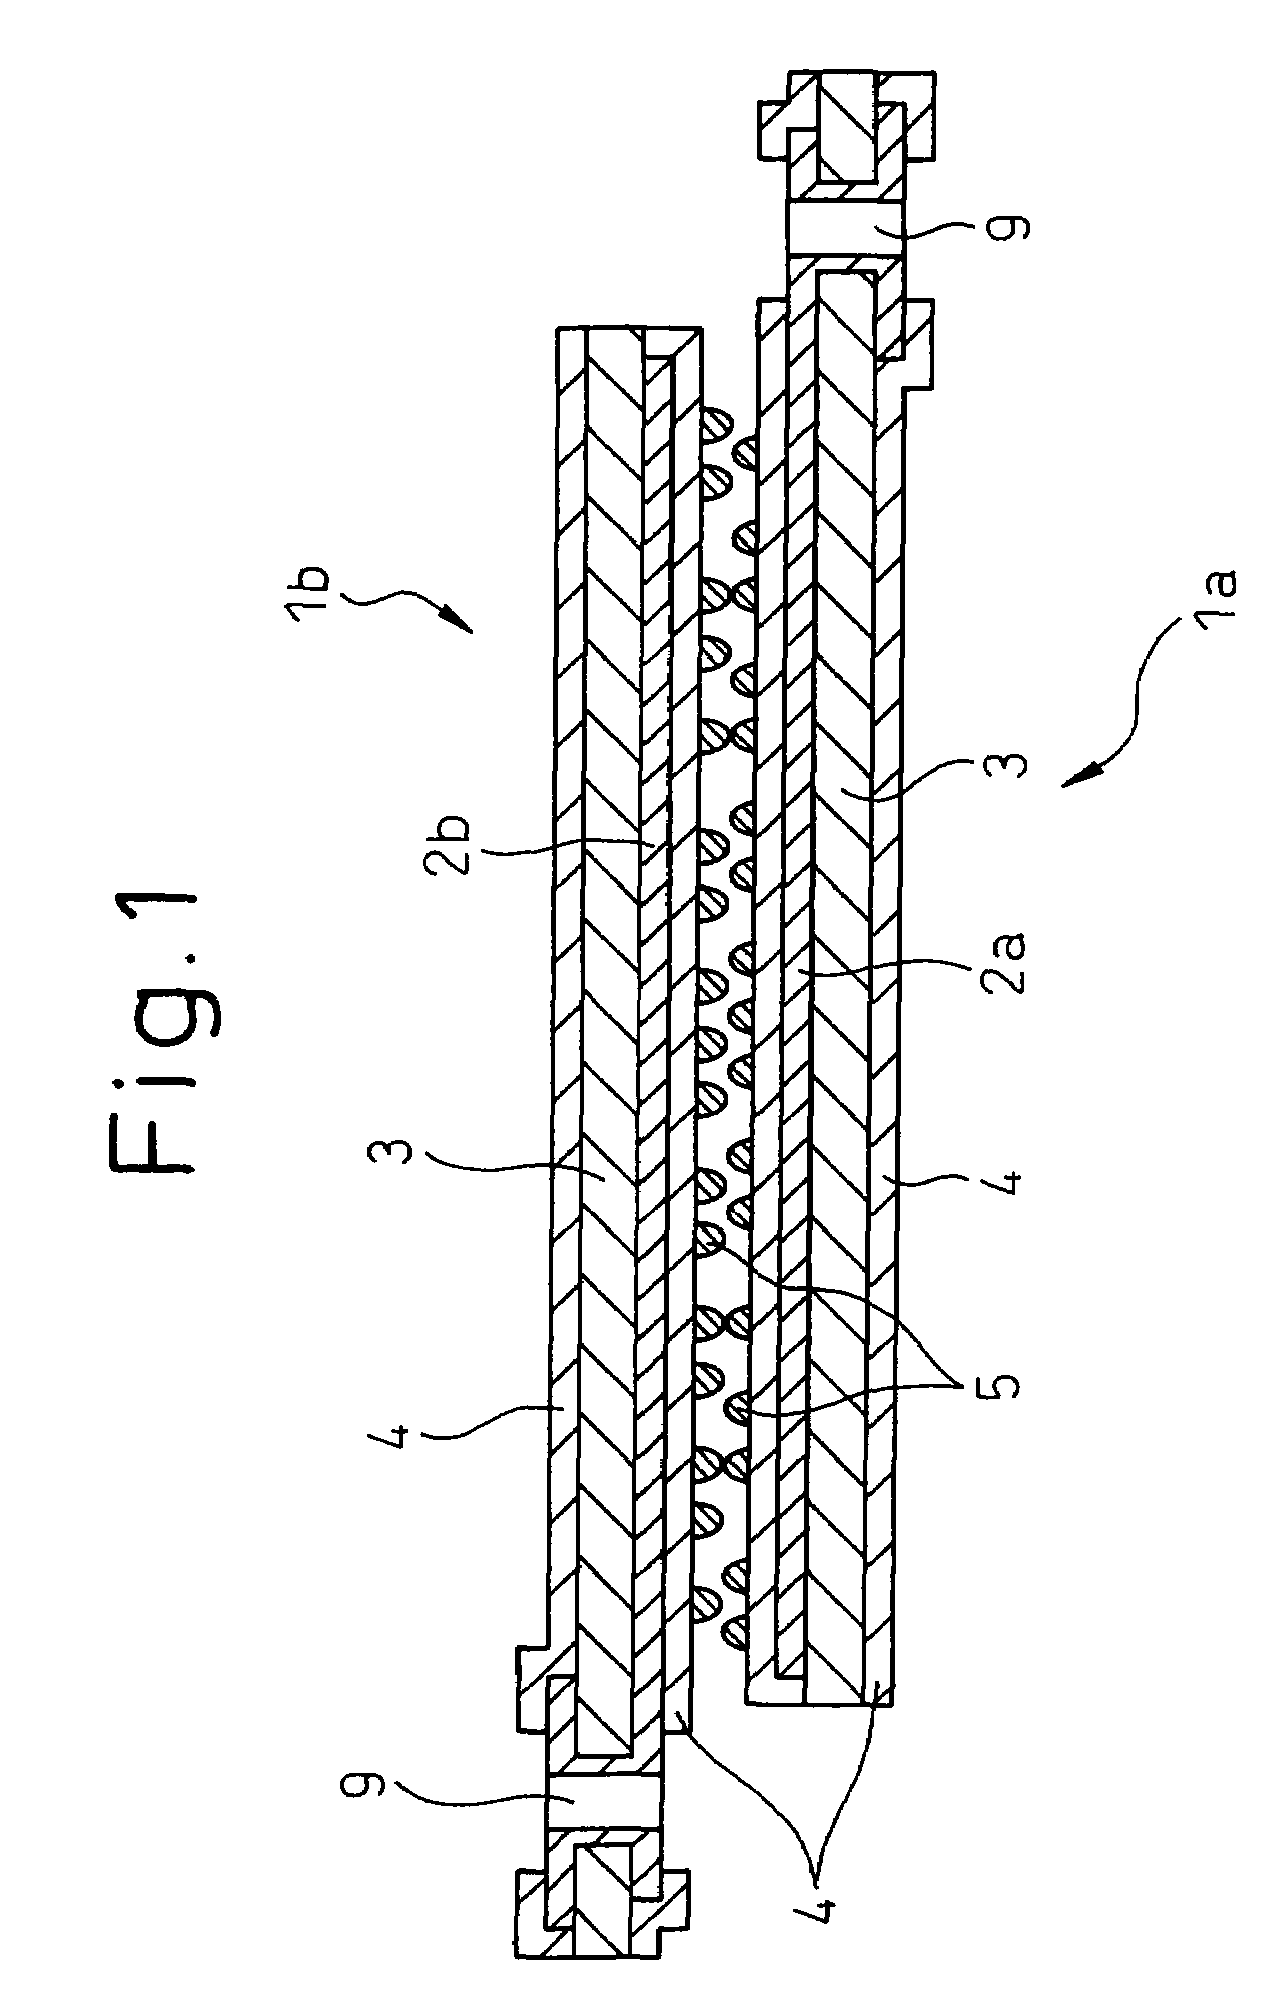 Electrostatic motor including projections providing a clearance between stator and slider electrode members